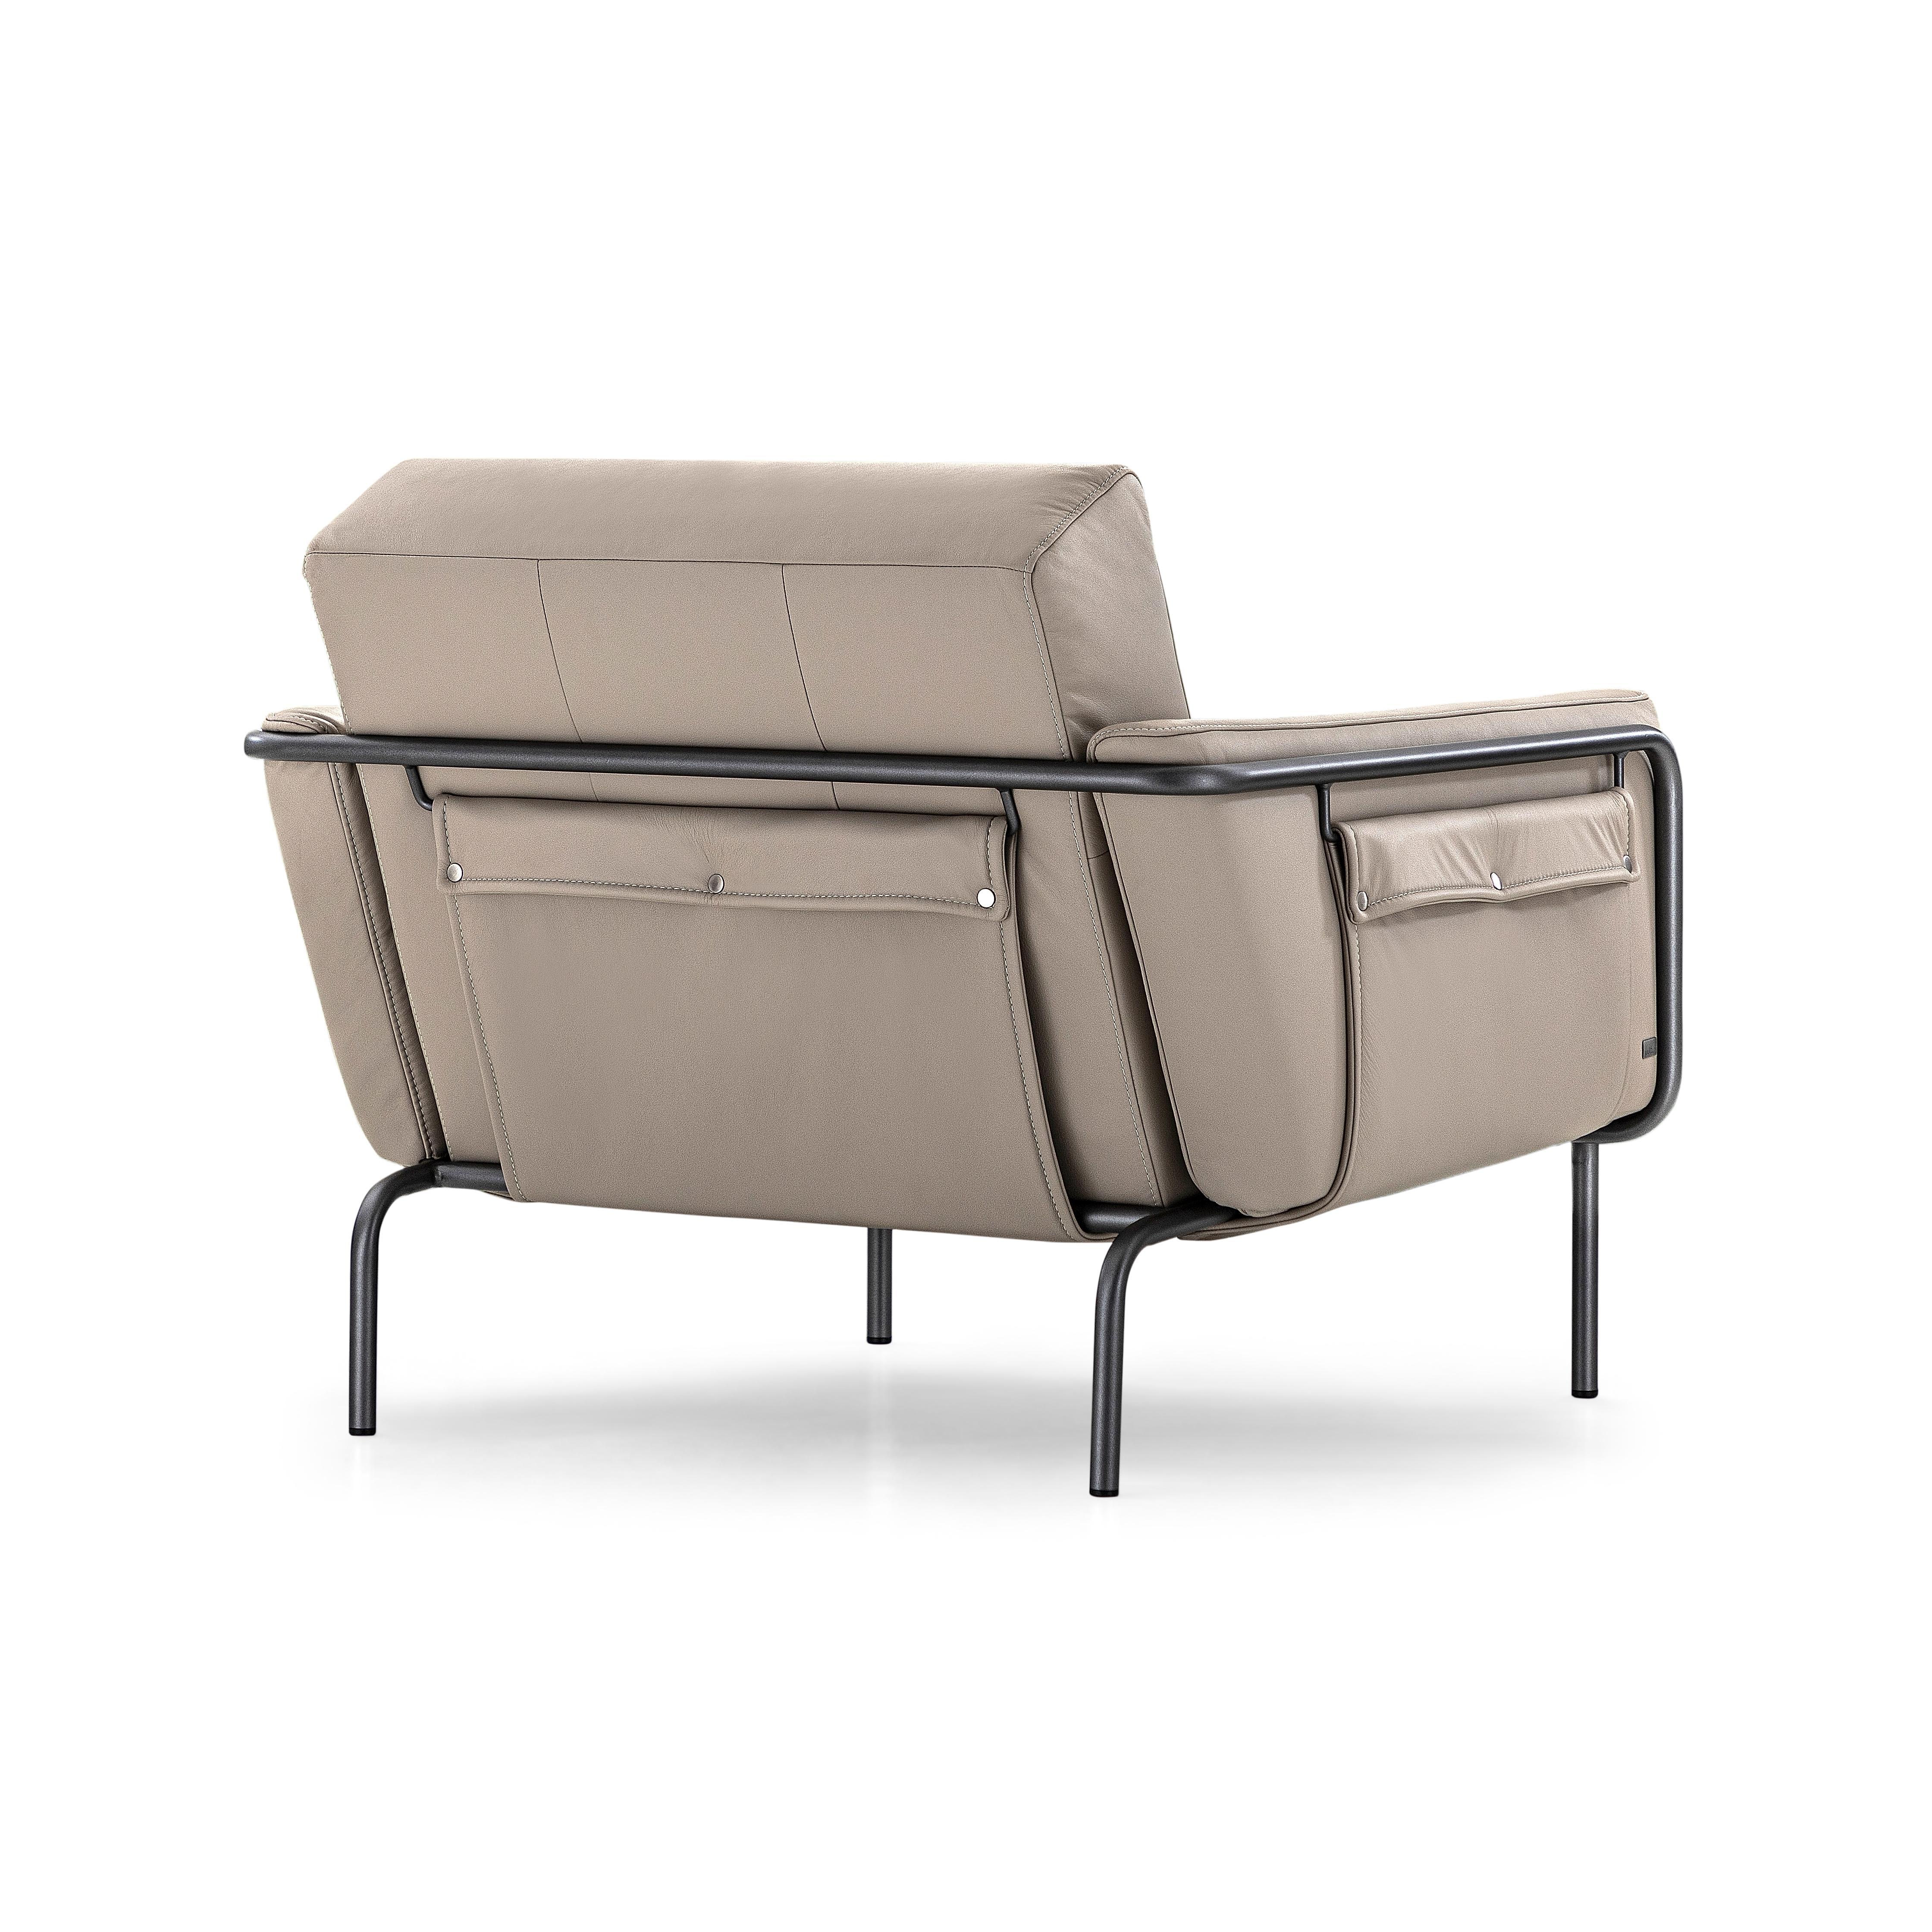 The Uultis design team has created this beautiful Trend armchair, upholstered with a beautiful ivory leather, feature with a black metal frame. With contemporary style features, this armchair was produced to meet all the needs of urban life, since